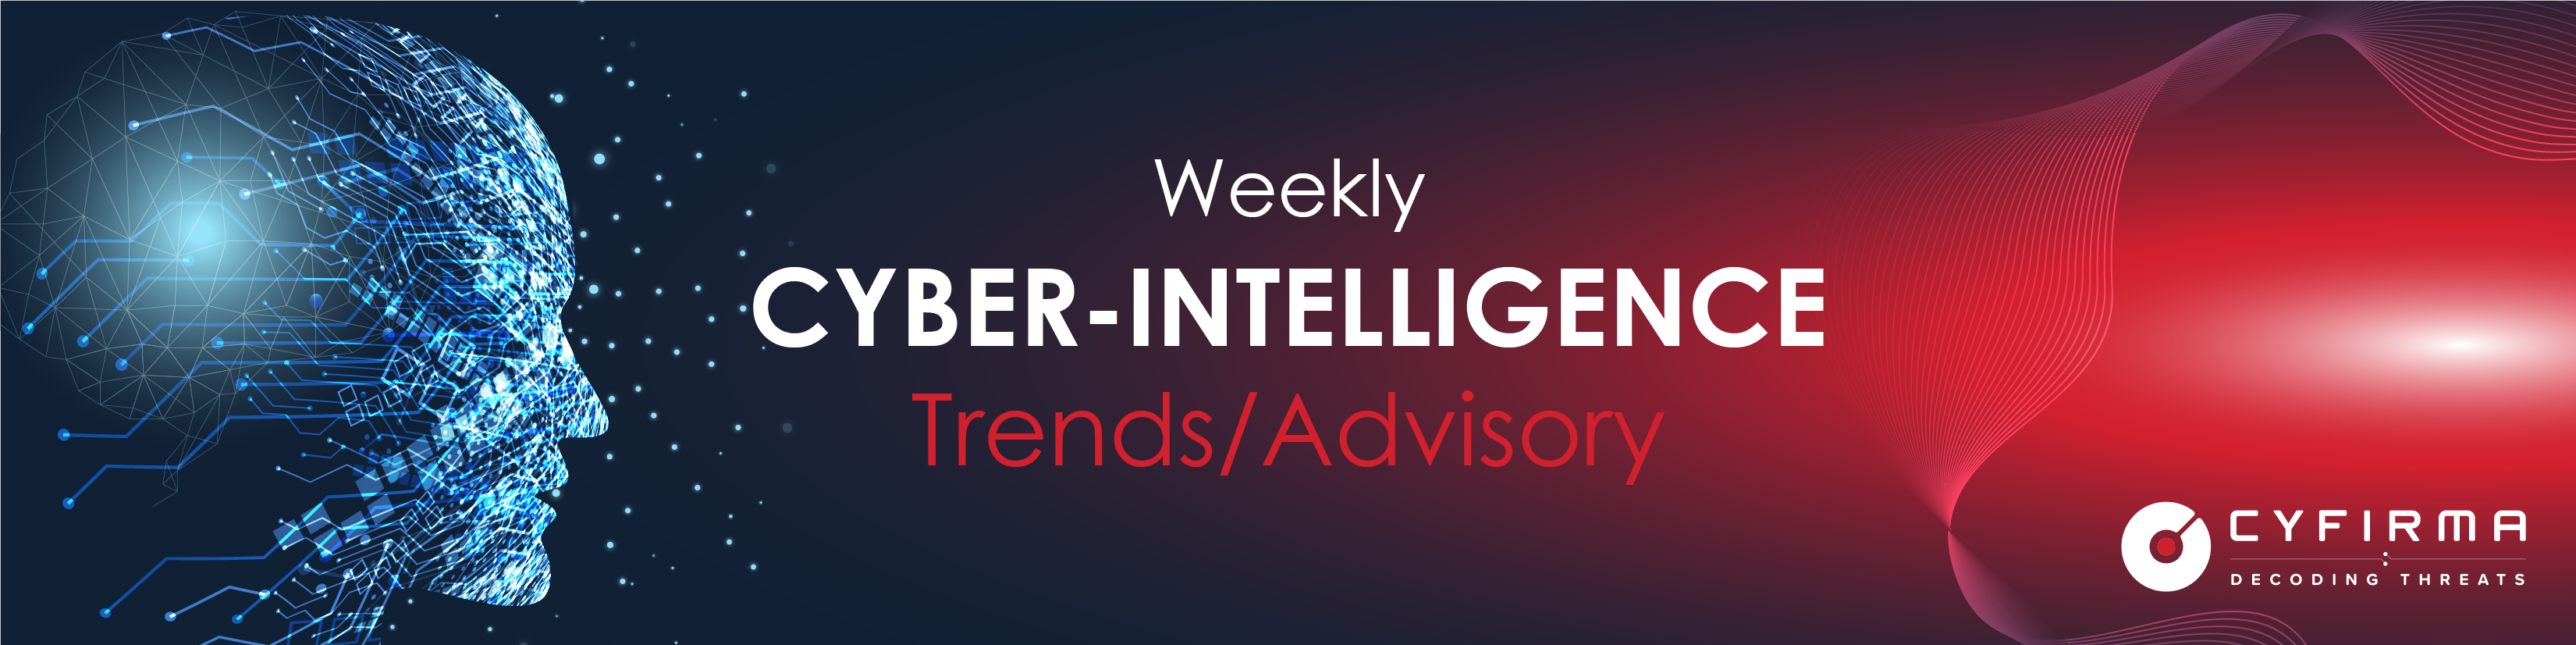 Weekly Intelligence Trends and Advisory | Threat Actor in Focus | Rise in Malware, Ransomware, Phishing | Vulnerability and Exploits – 24 Oct 2021